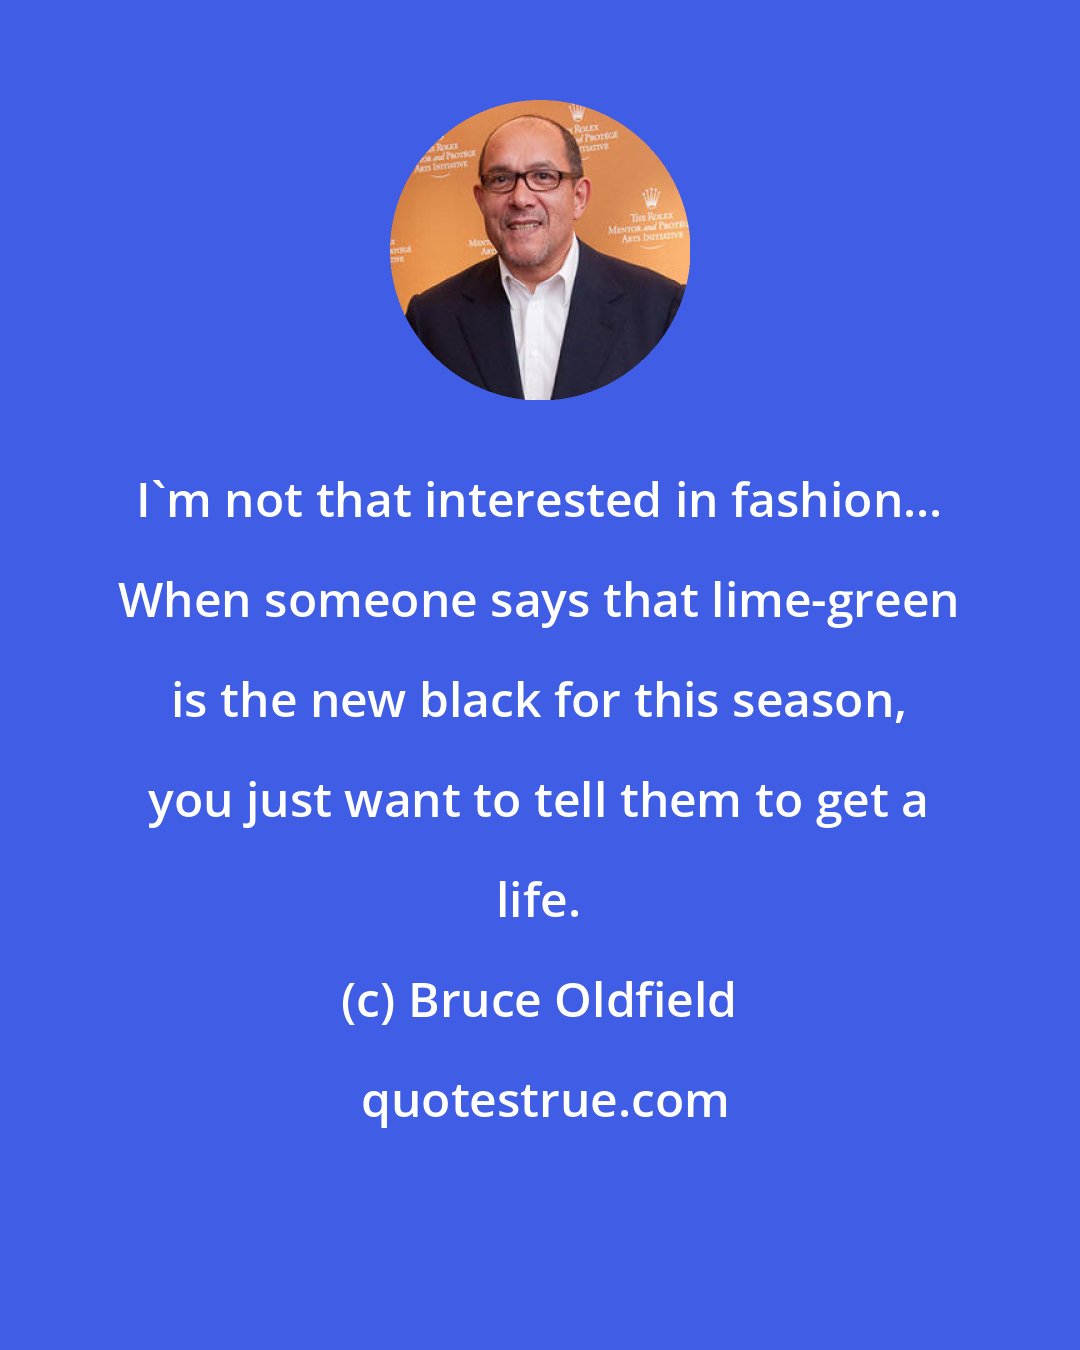 Bruce Oldfield: I'm not that interested in fashion... When someone says that lime-green is the new black for this season, you just want to tell them to get a life.